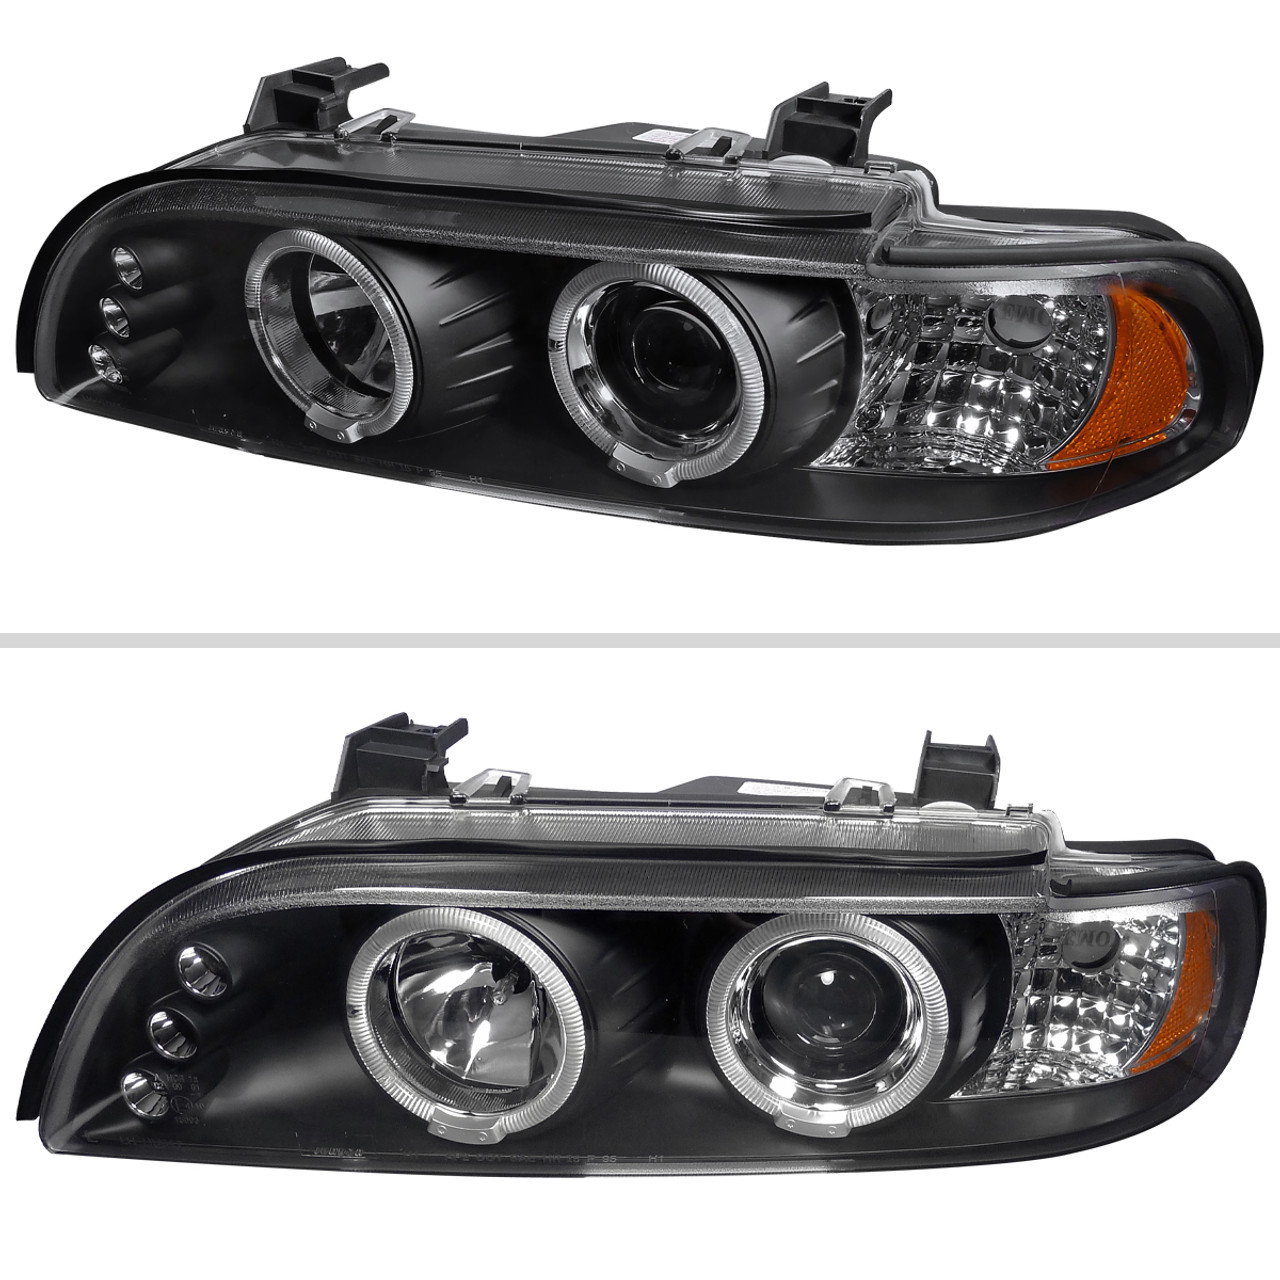 Spec-D Tuning Halo Projector Headlights + LED Signal Glossy Black  Compatible with 2001-2003 BMW E39 5-Series All Without OE Xenon Headlights  Left +